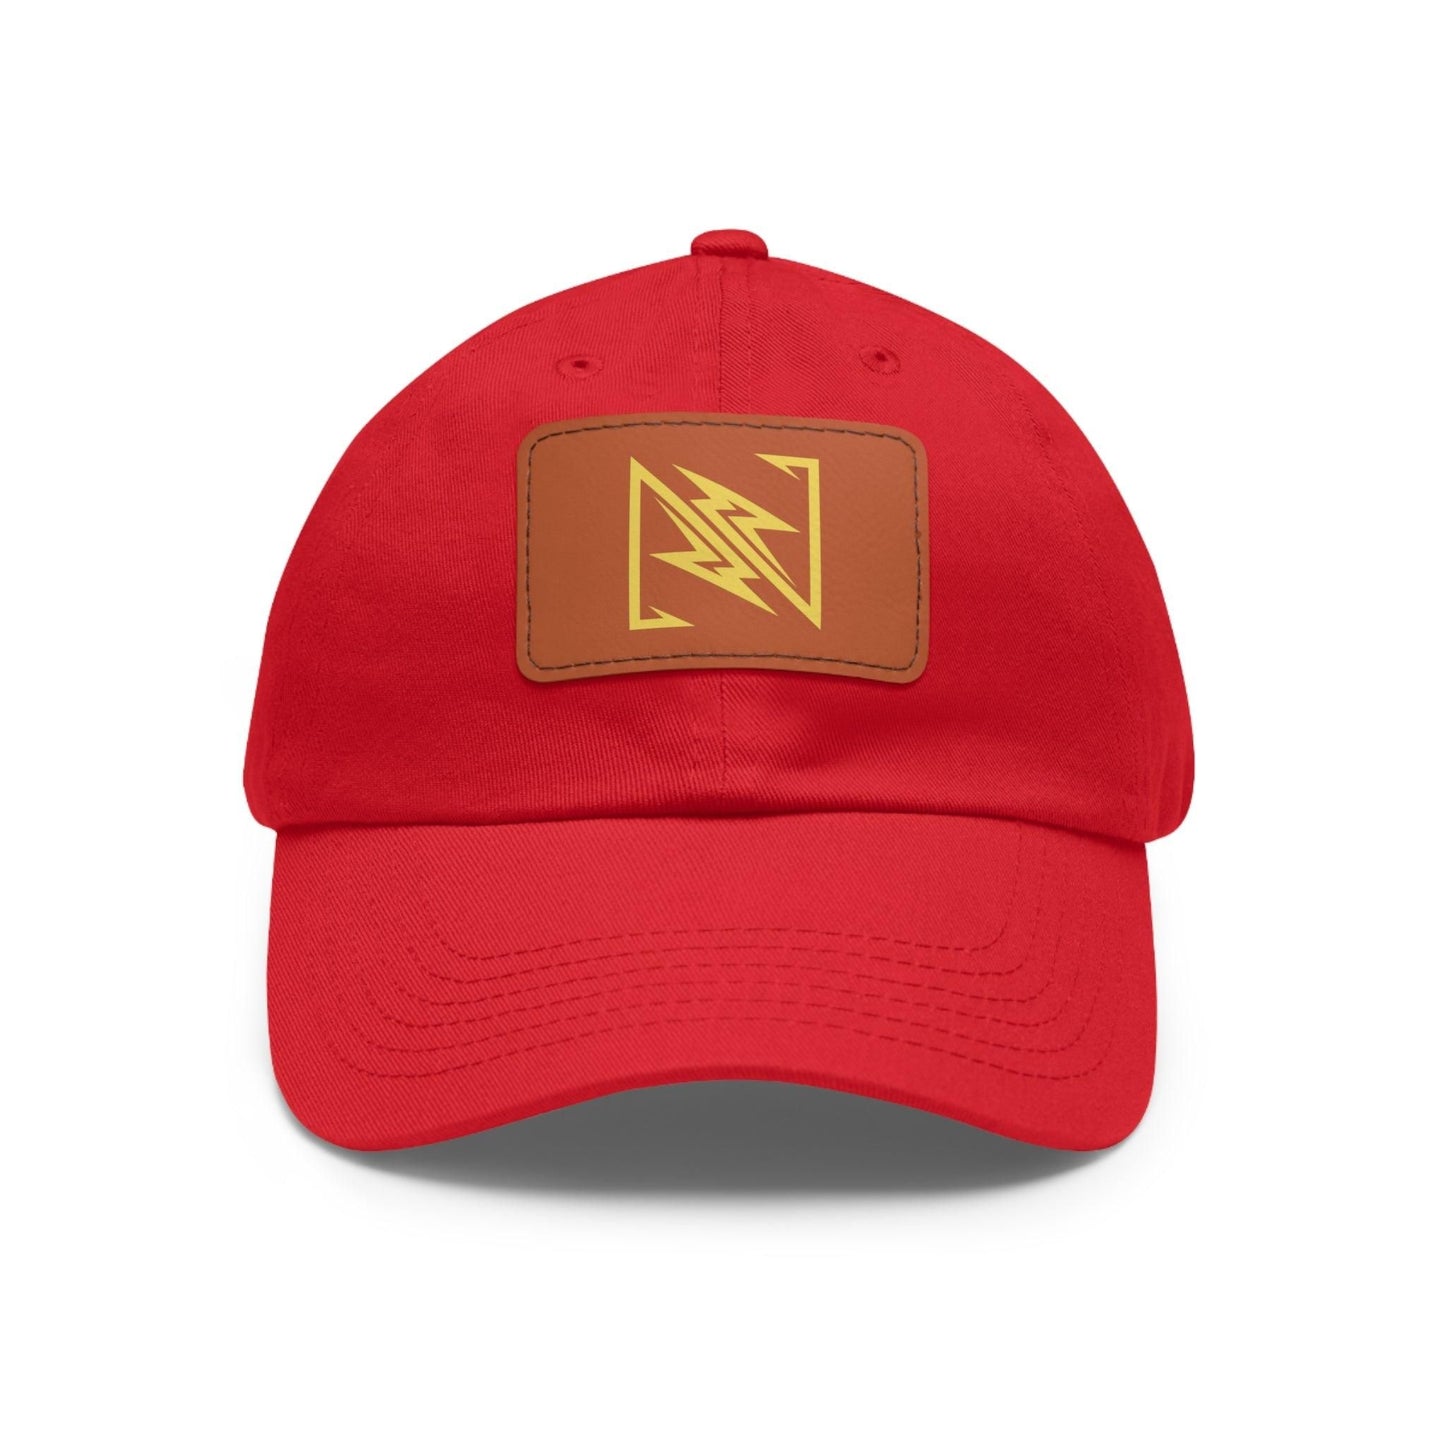 NX Vogue Premium Baseball Hat with Leather Patch Cap Red / Light Brown patch Rectangle One size